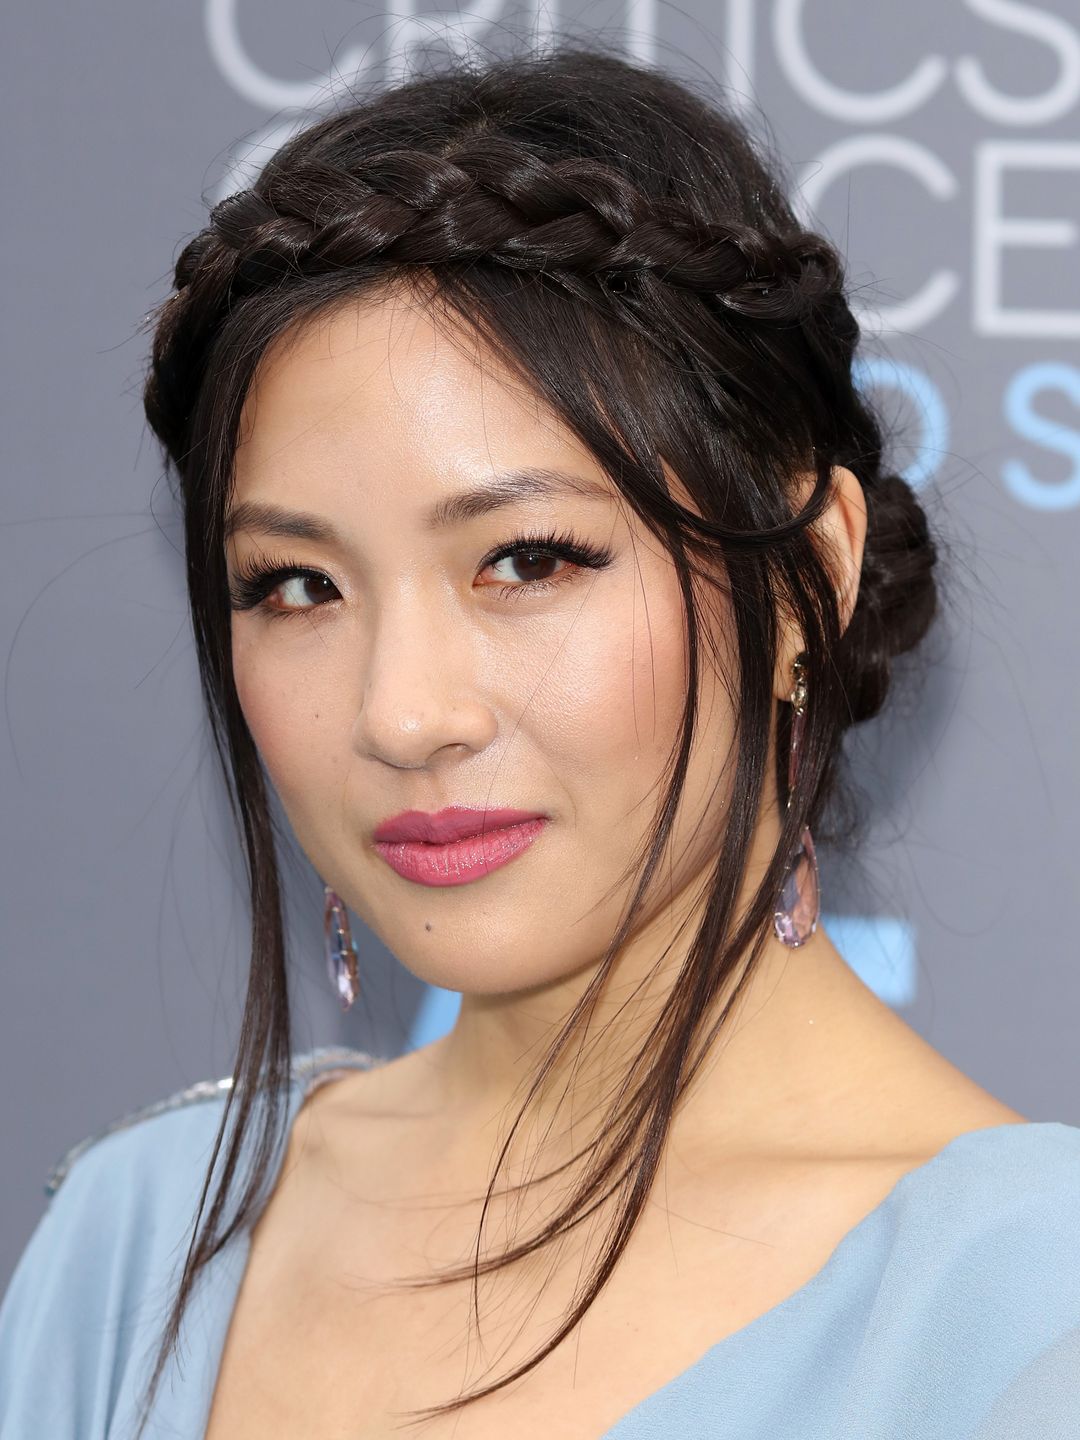 Constance Wu age